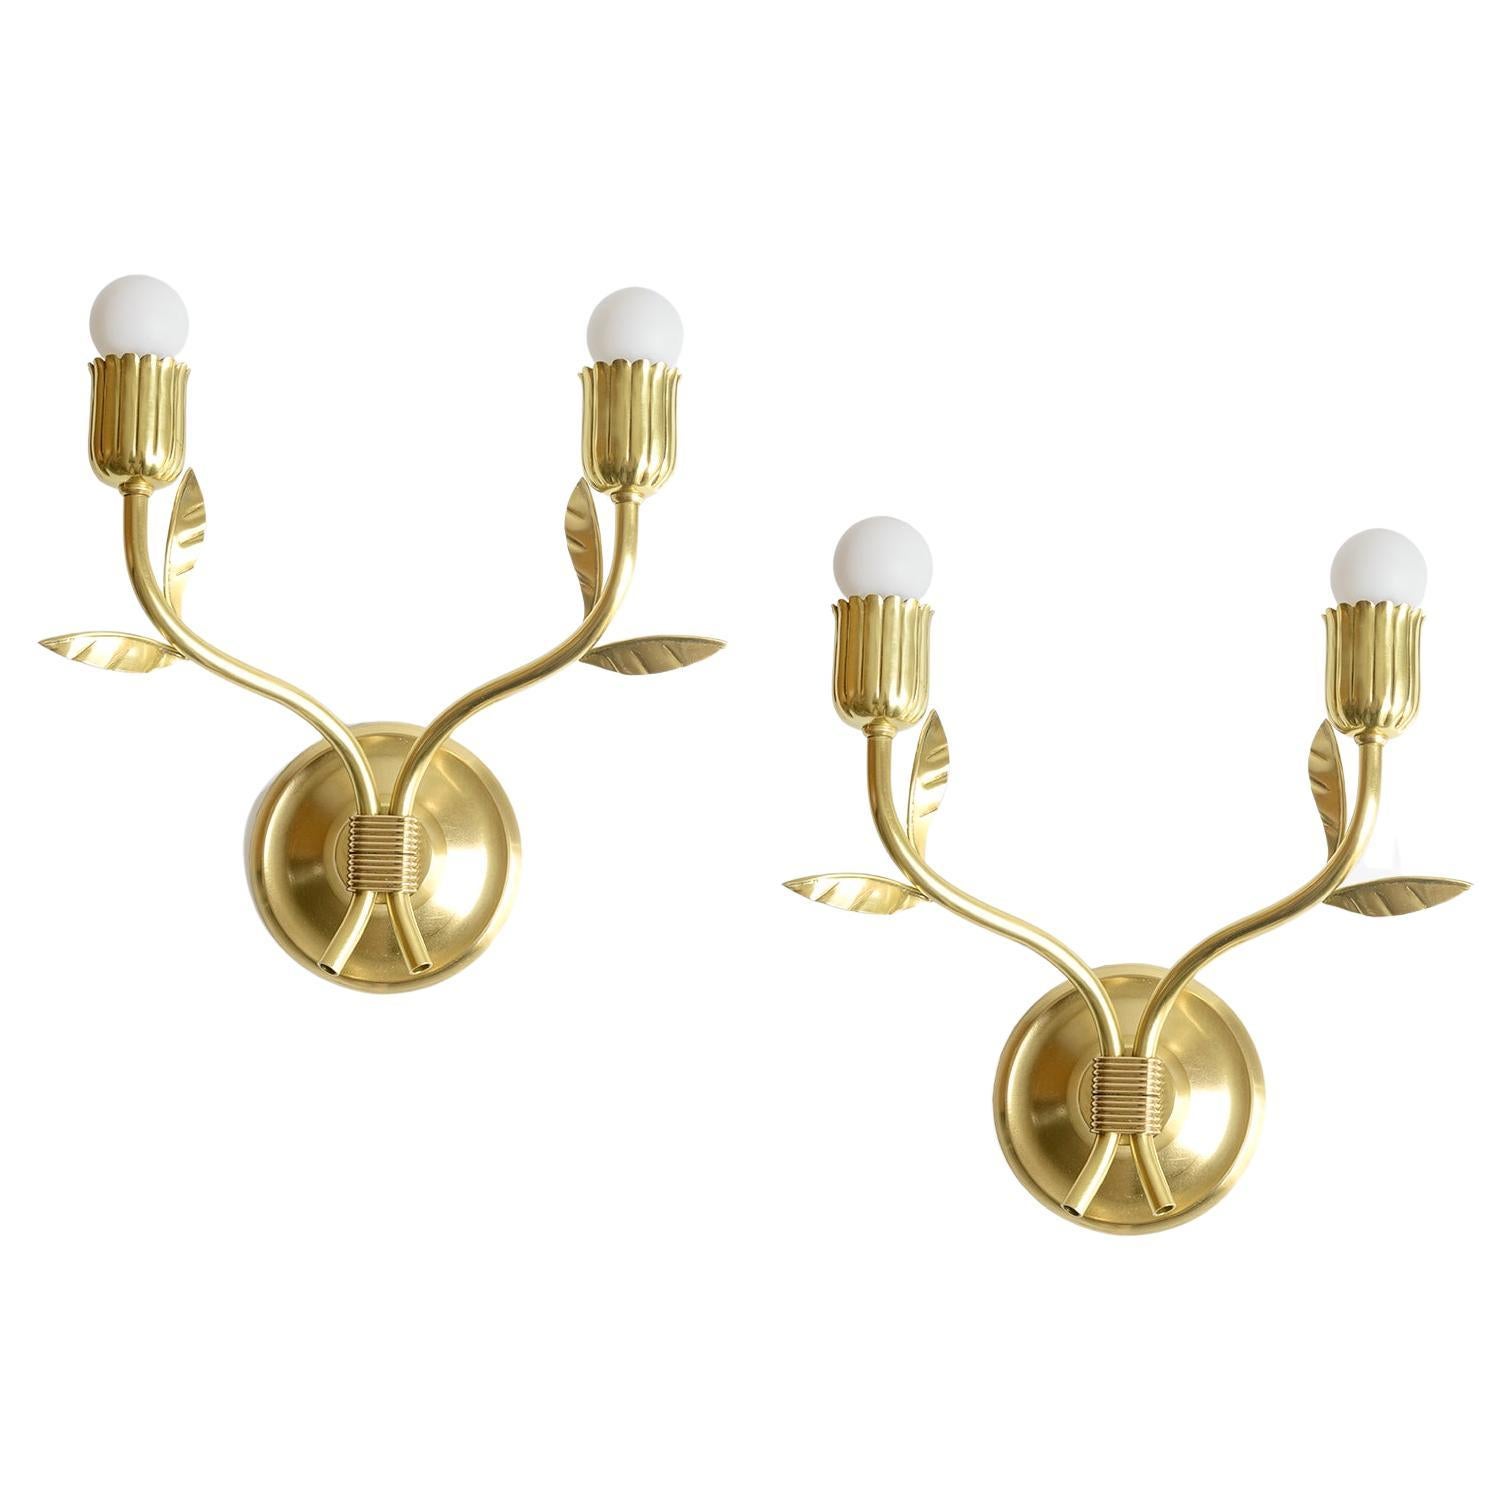 Pair of polished double arm, Scandinavian Modern wall sconces in polished brass. Each sconce has a pair of branch like arms with leaves and a floral bud socket holder. The backplate is cast brass and will fit any a standard electrical wall box. The